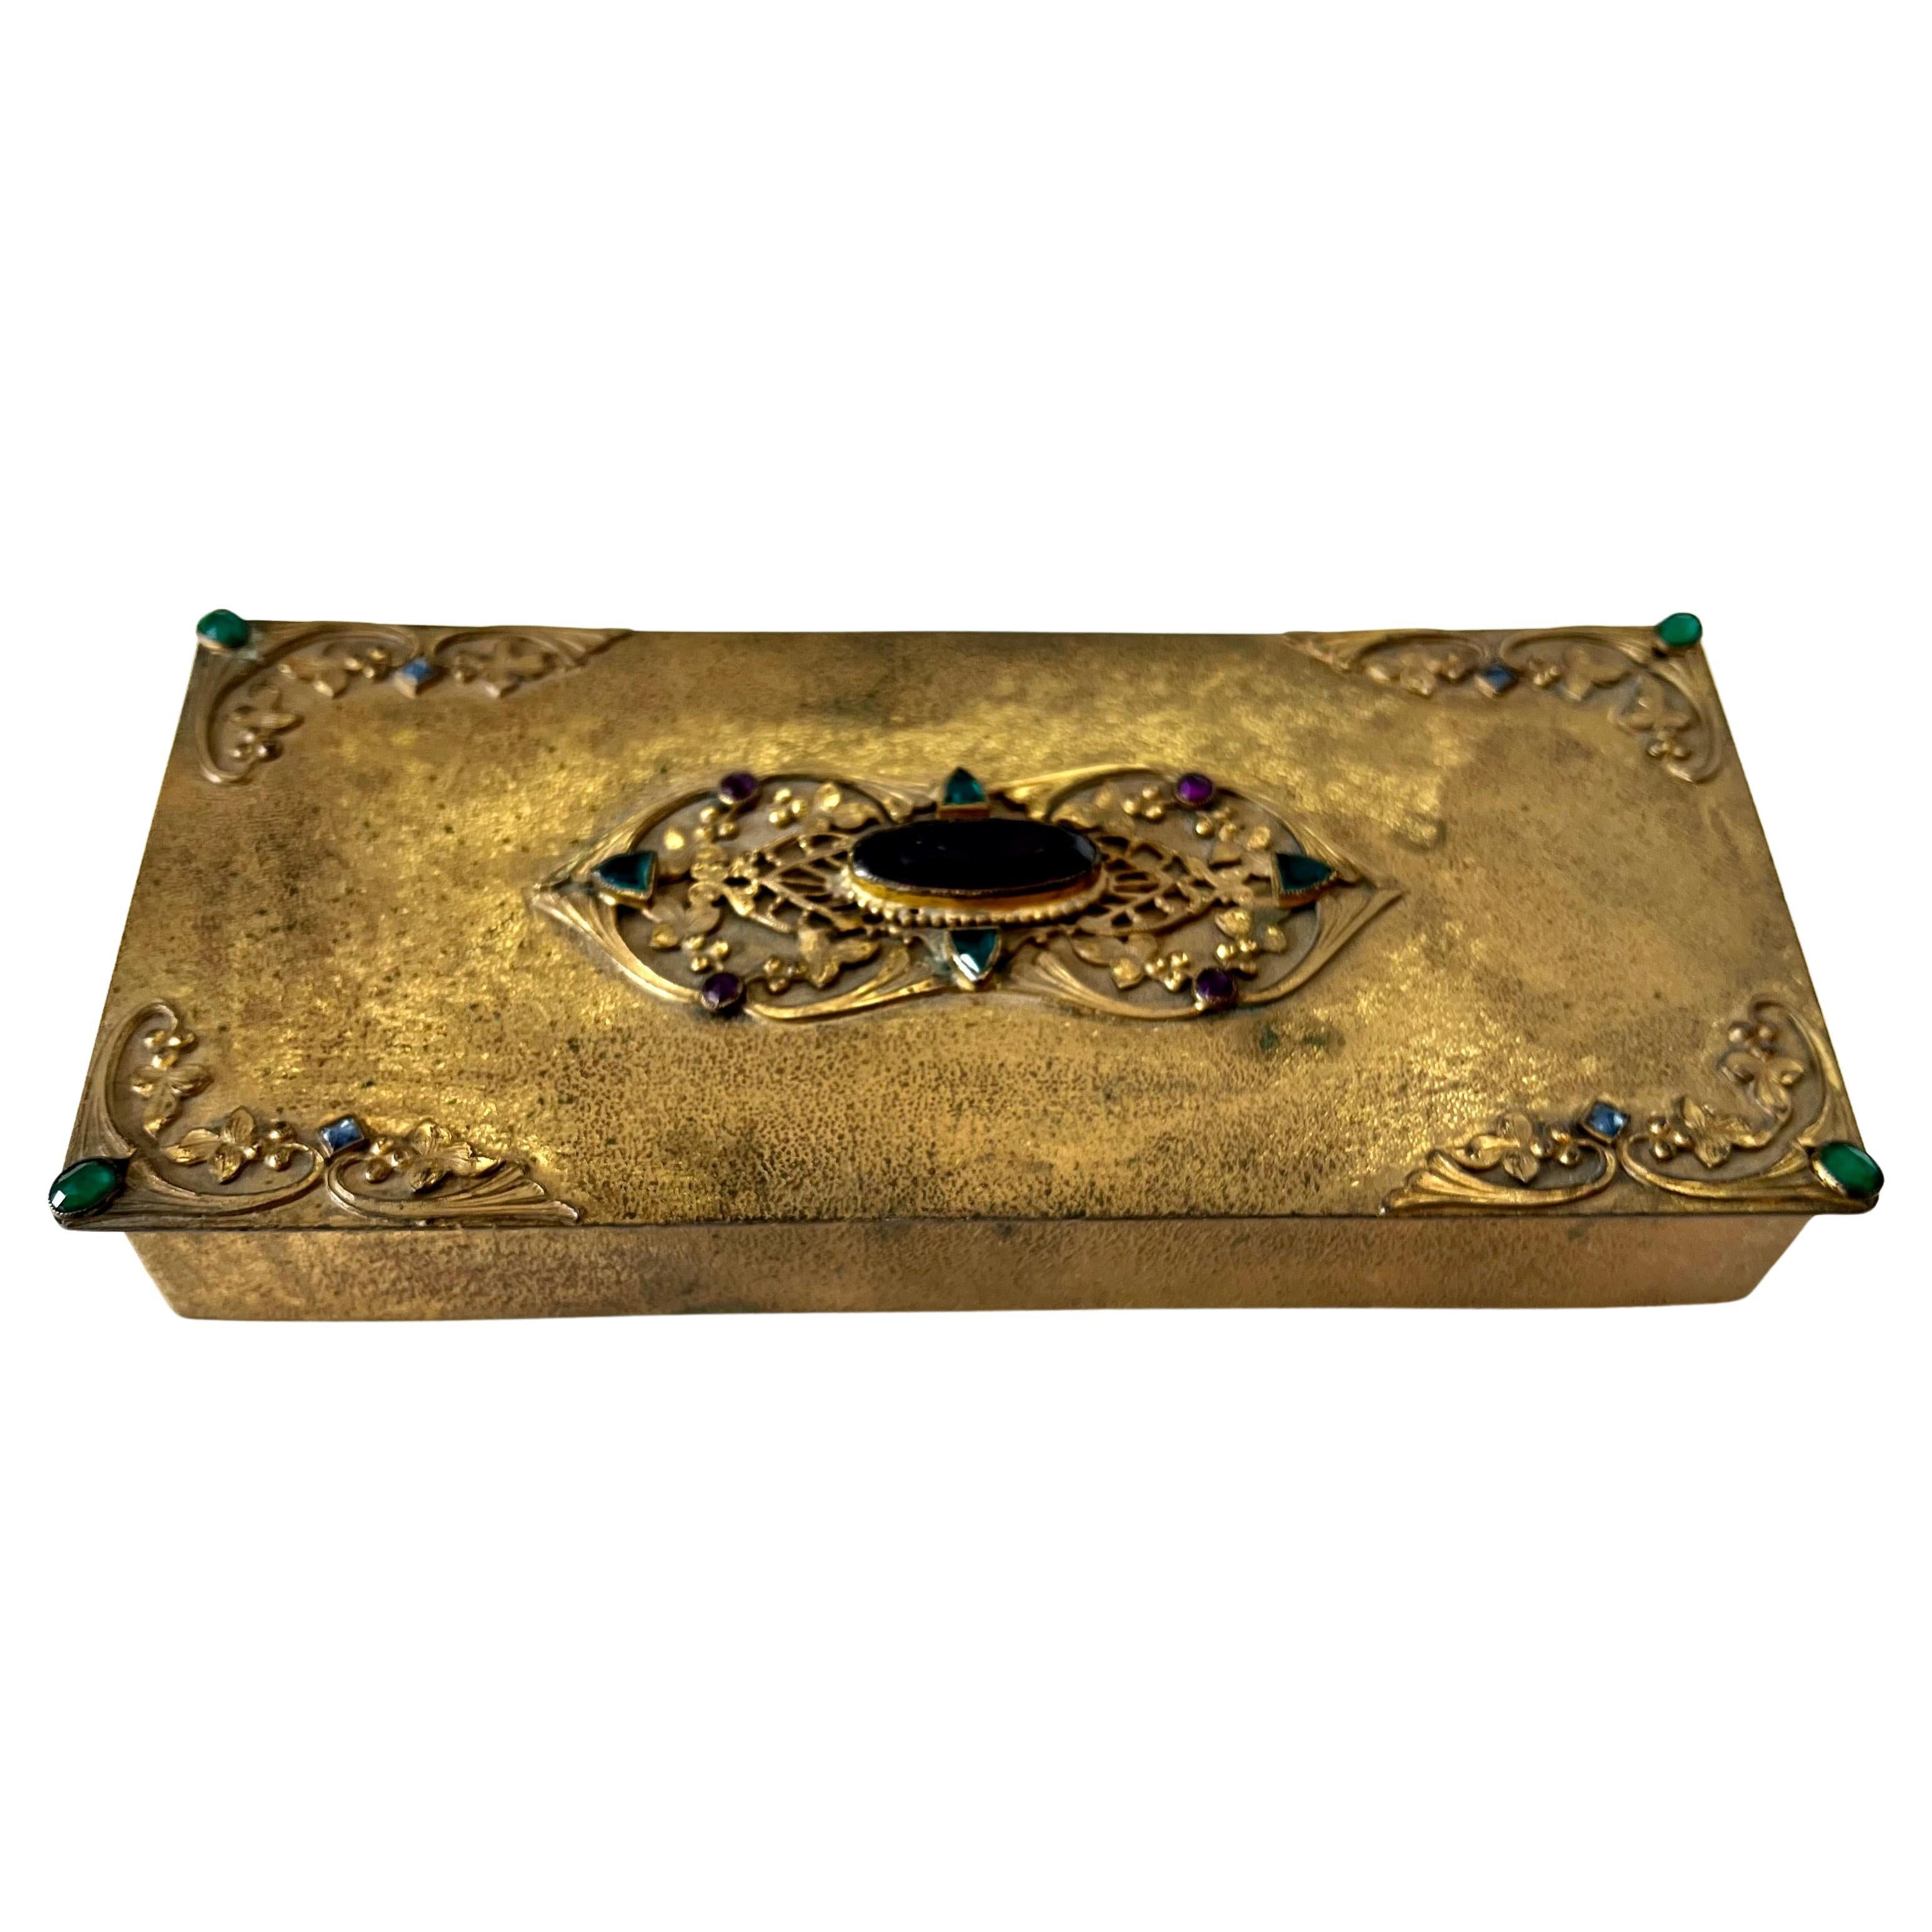 A wonderful box of art gold, with detailed corners and centerpiece, all with stones.  All Stones are in tact with no chips or fractures.  The box is lidded with a hinge and has an interior wooden piece.  

A compliment to any vanity, cocktail table,